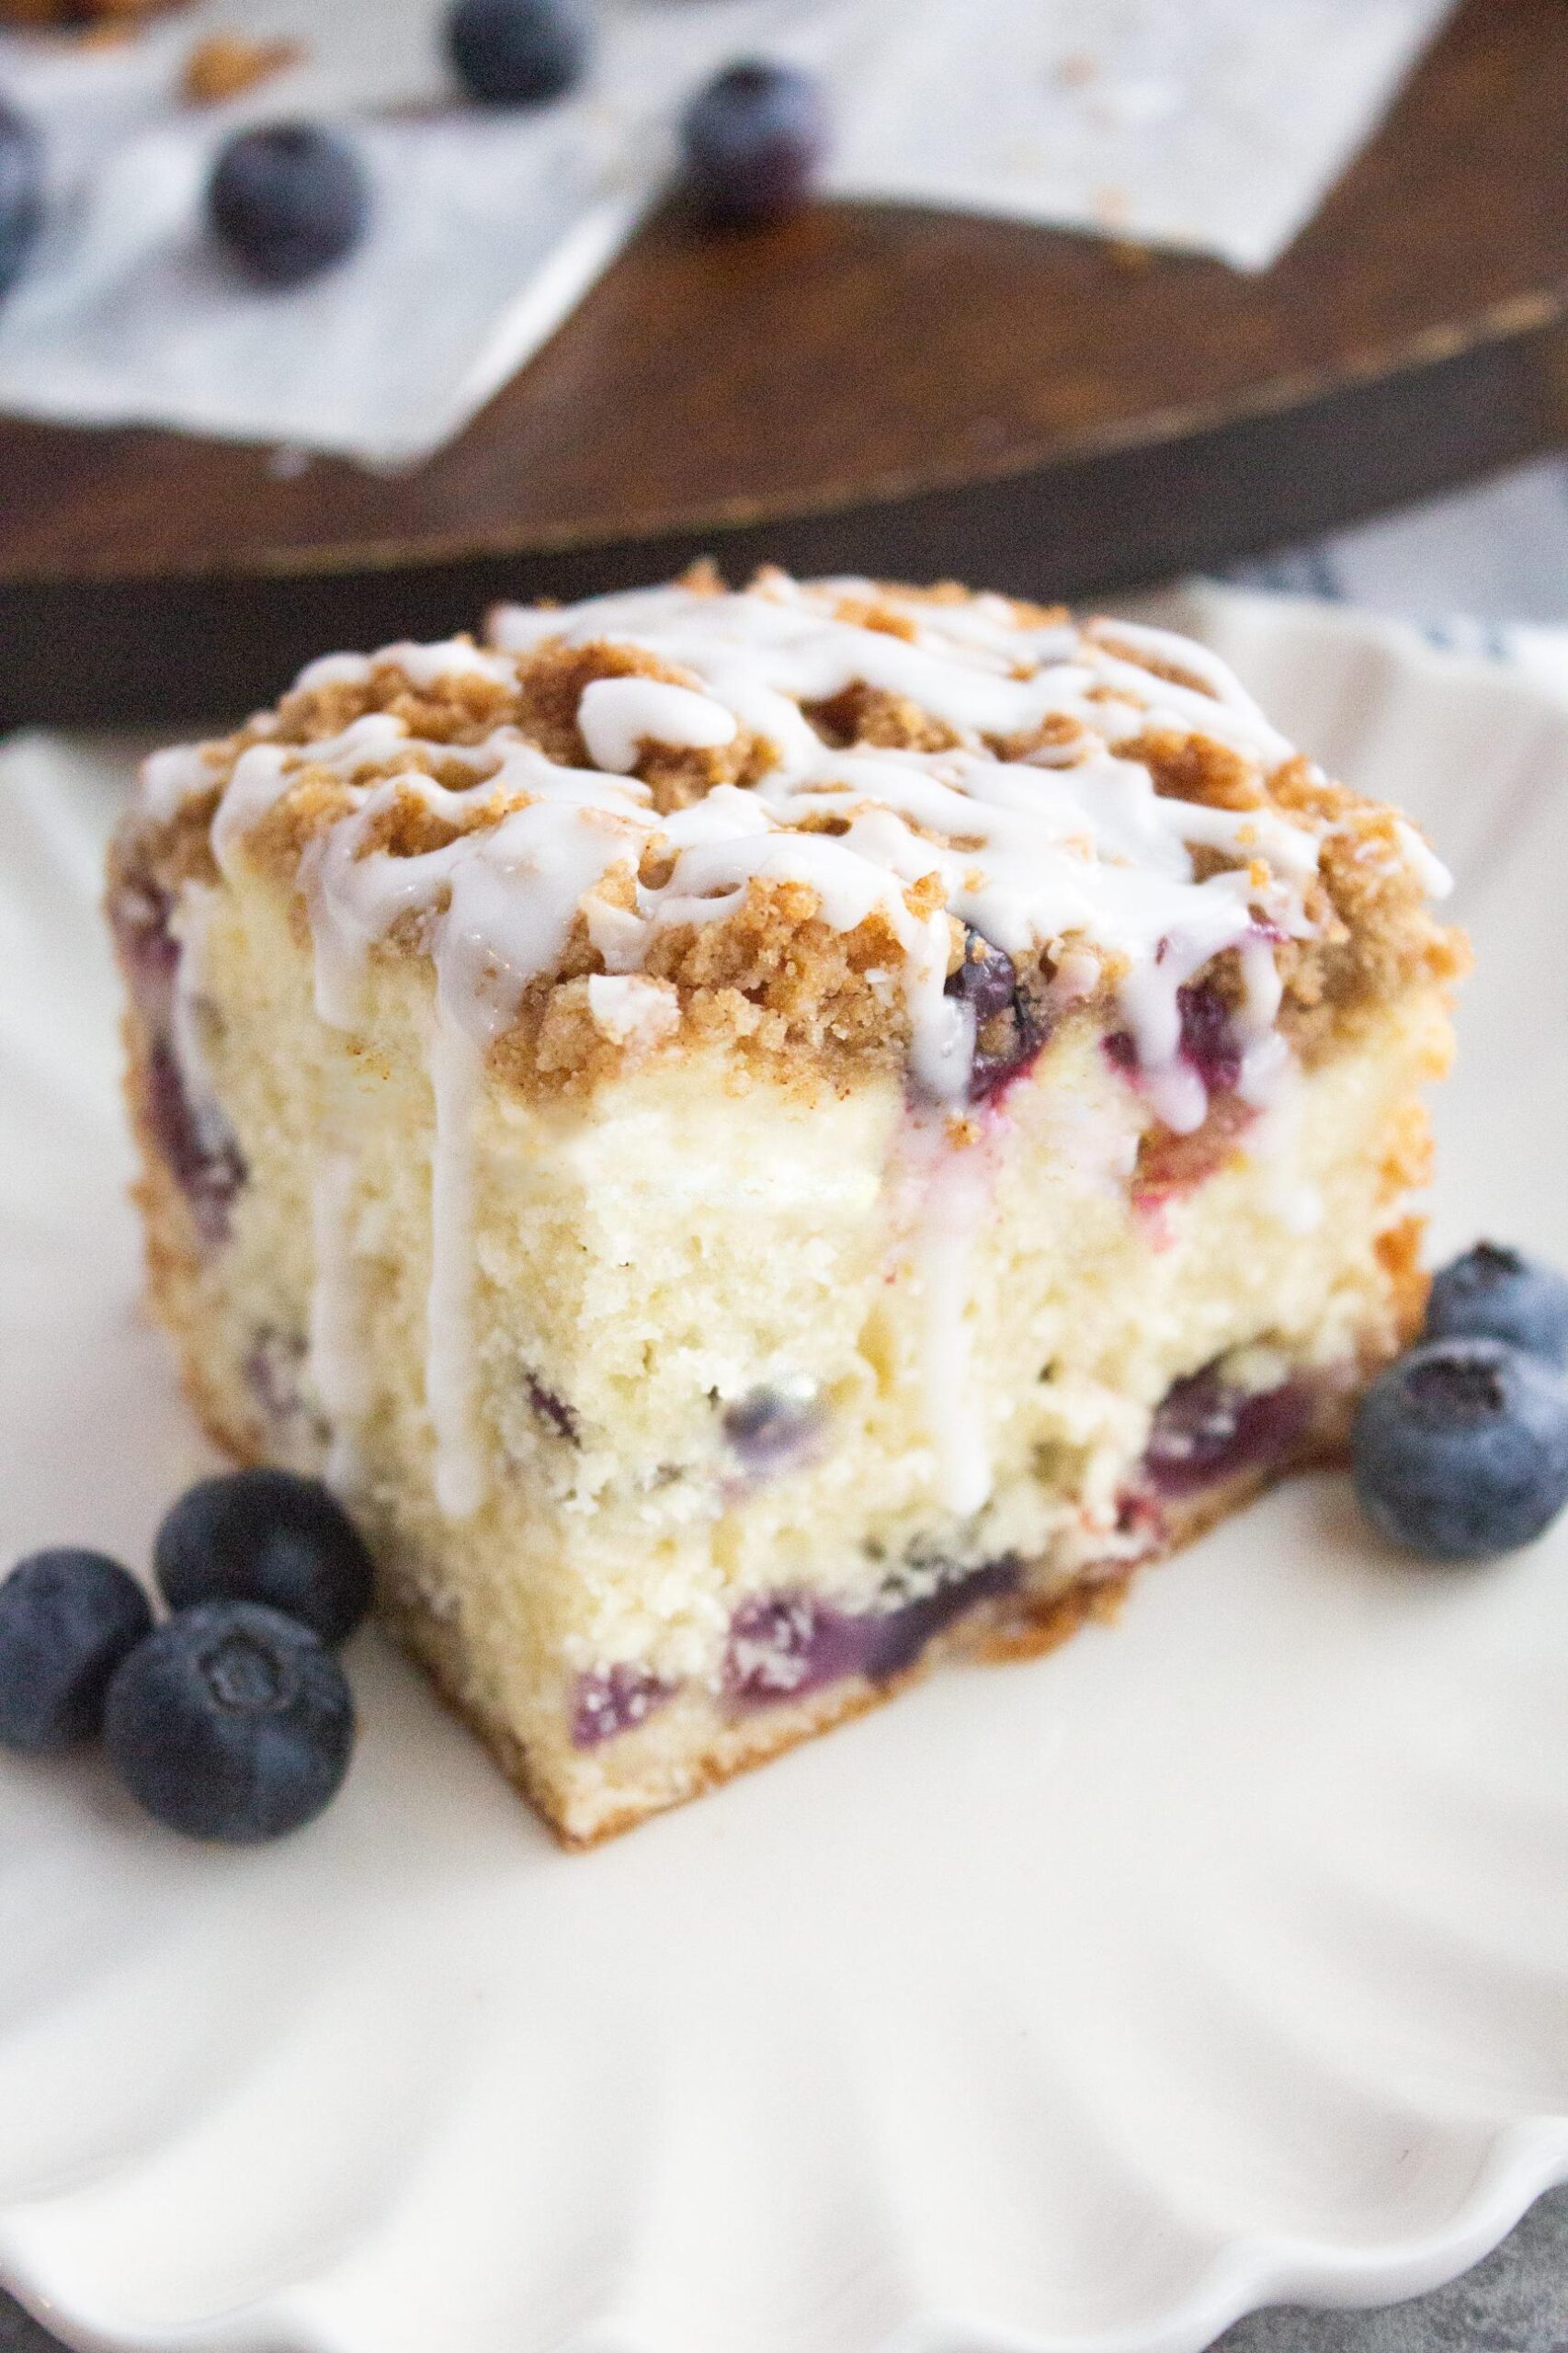  Blueberries and cream cheese make the perfect pair!